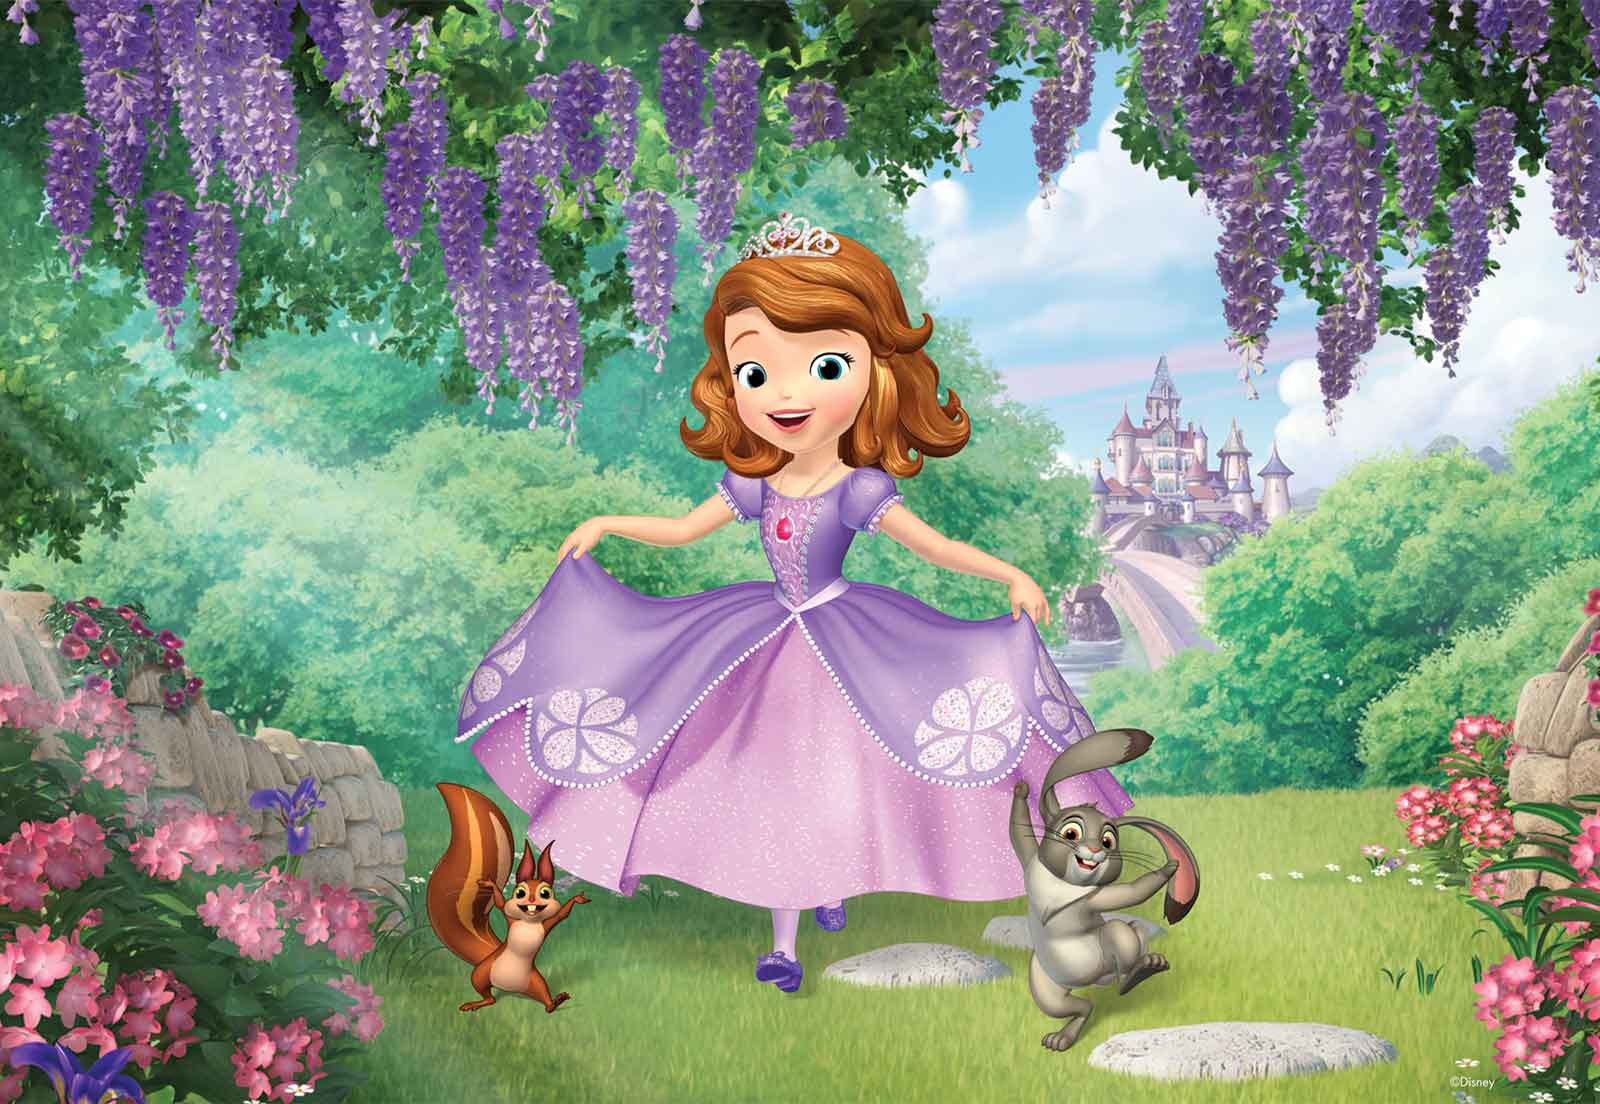 sofia the first background